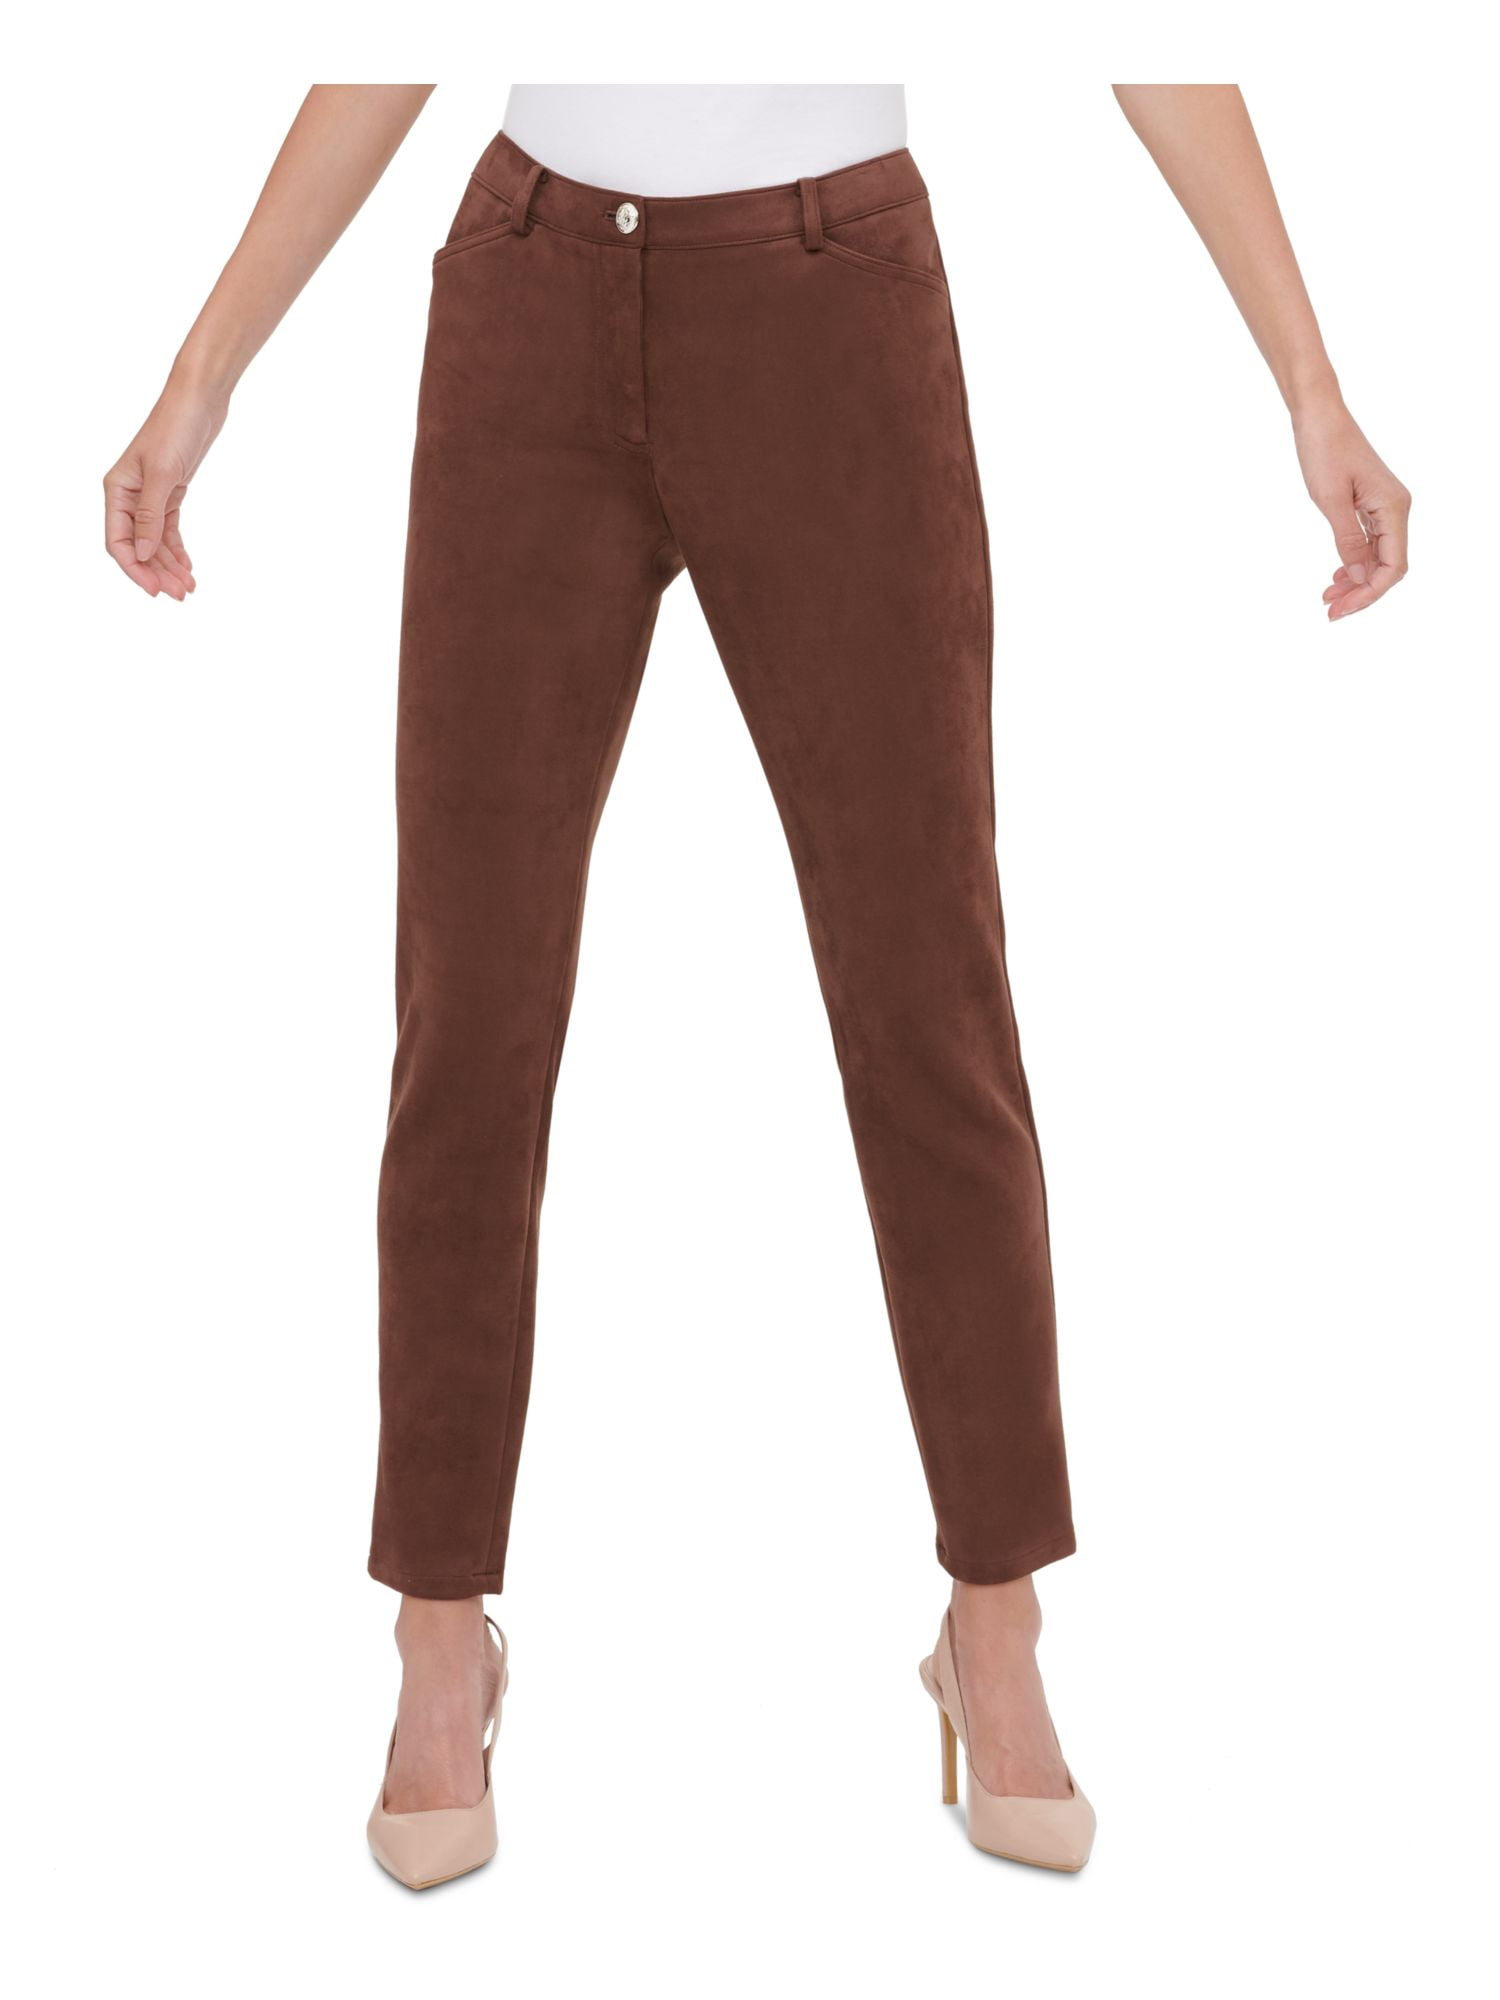 TOMMY HILFIGER Womens Brown Faux Suede Pants Size: 12 